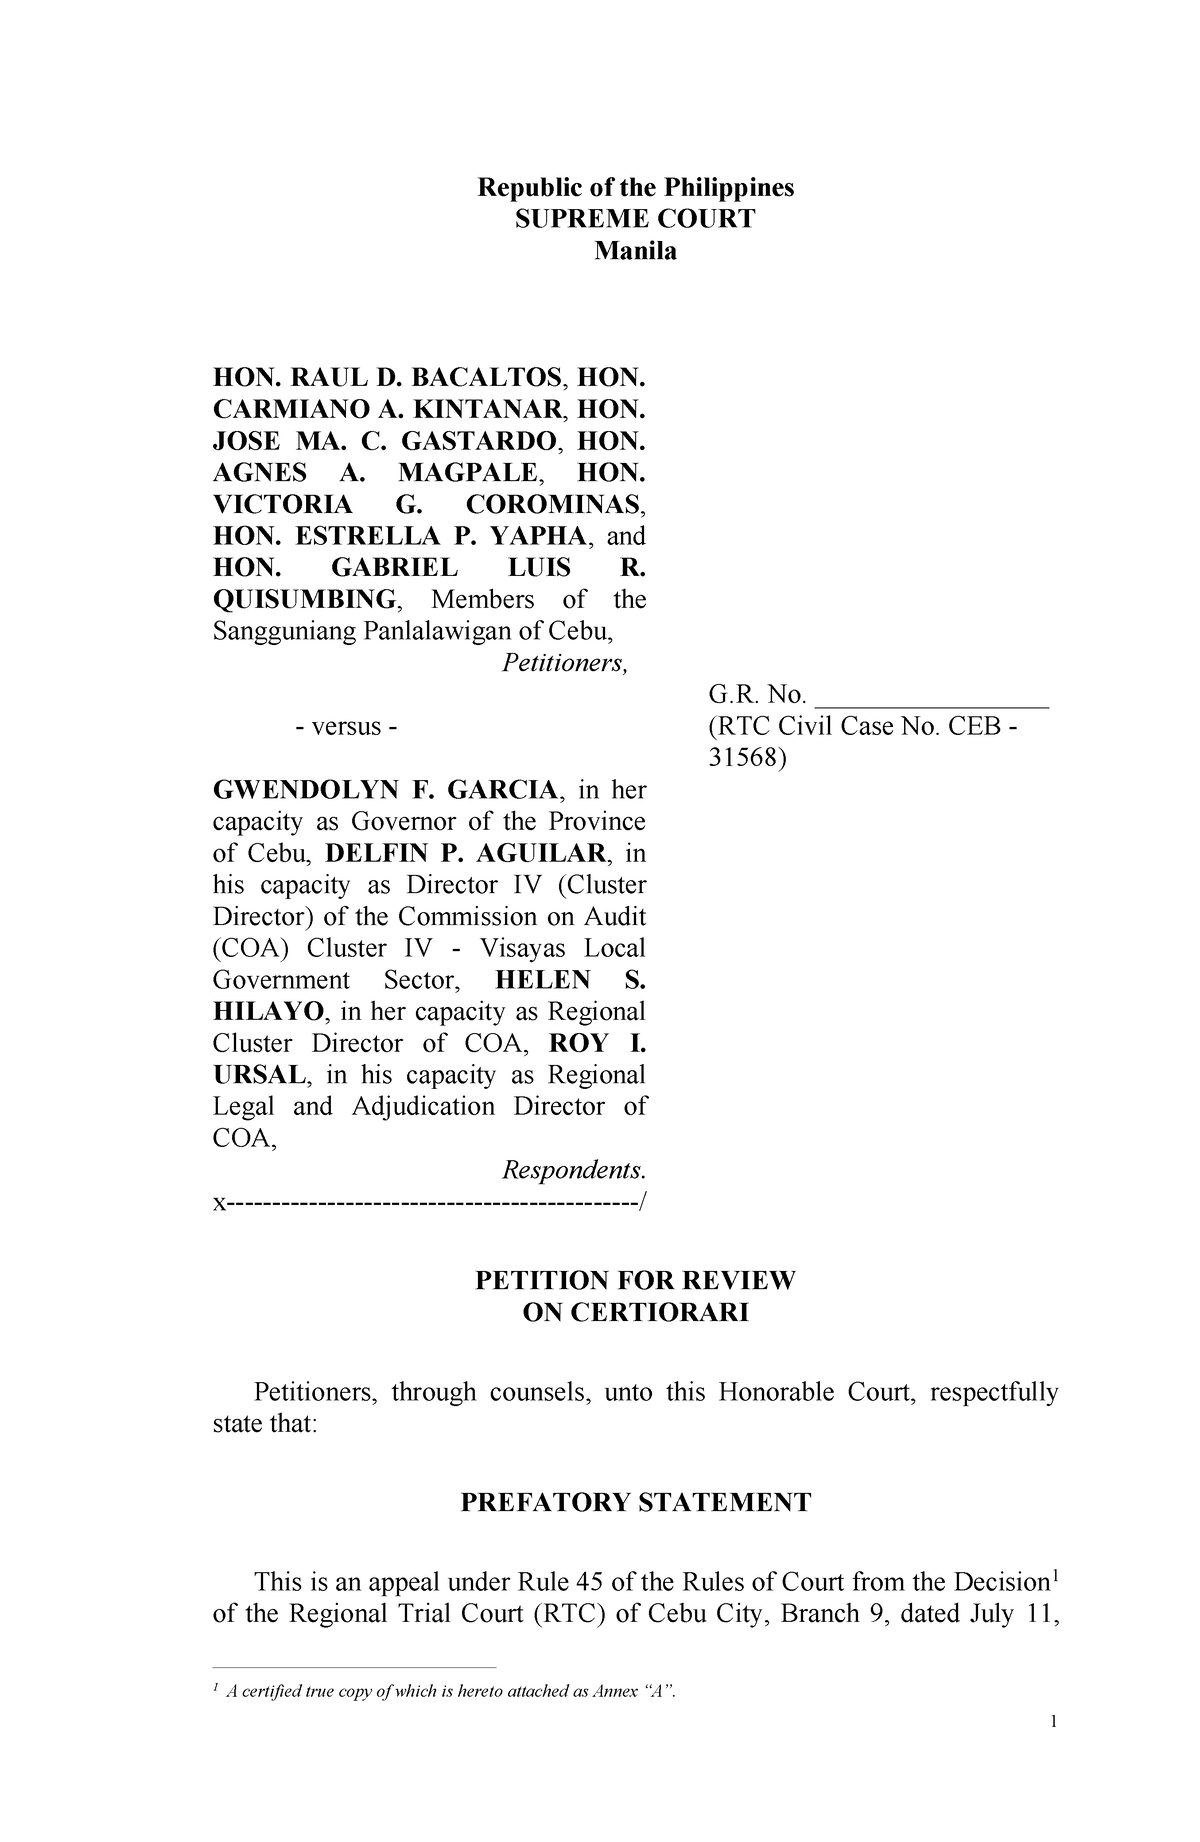 Sample Petition for Review on Certiorari Republic of the Philippines